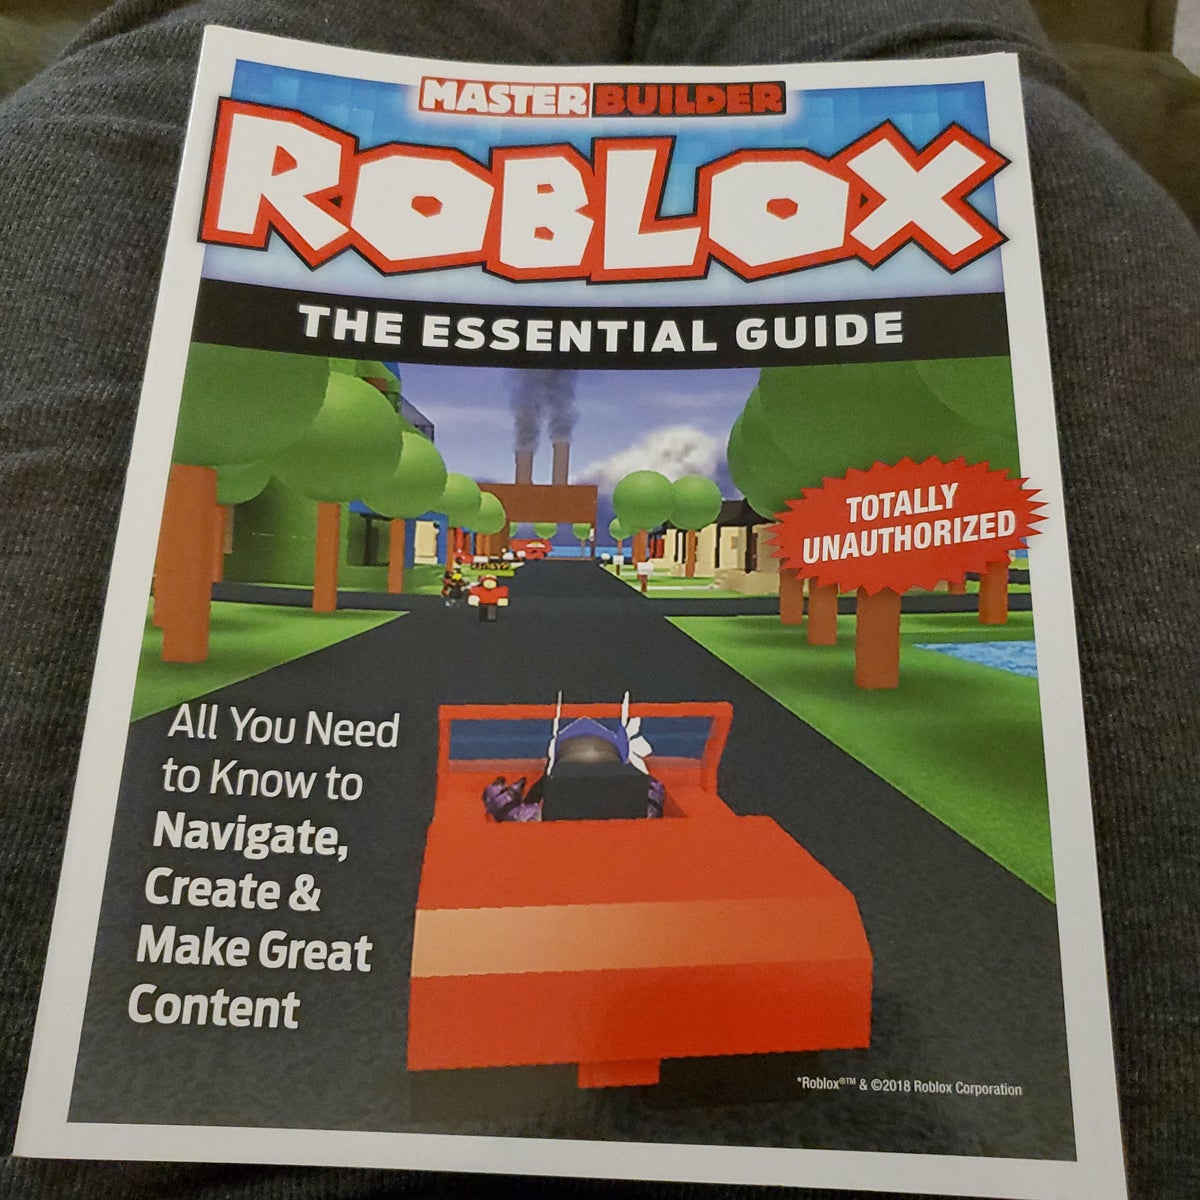 Roblox: the Essential Guide by David Jagneaux